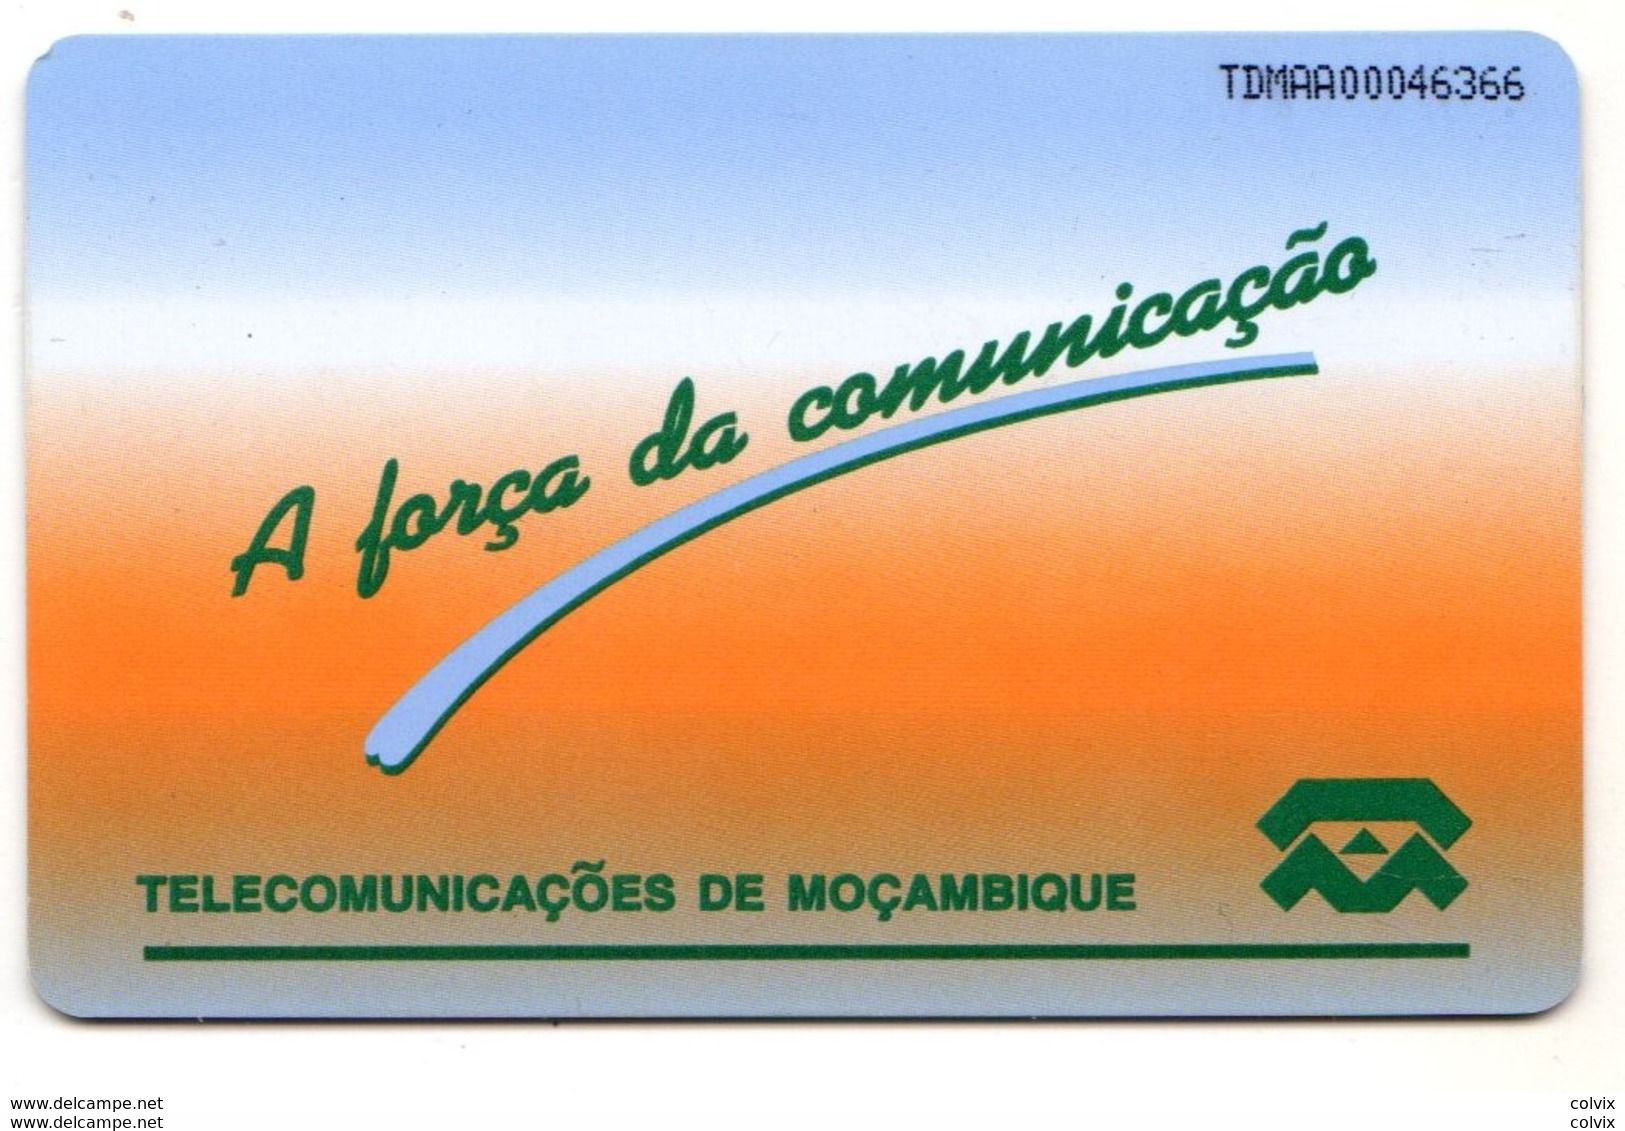 MOZAMBIQUE REF MV CARDS MZB-01 50 000MT1997 Instructions Of Use 1 - Mozambique